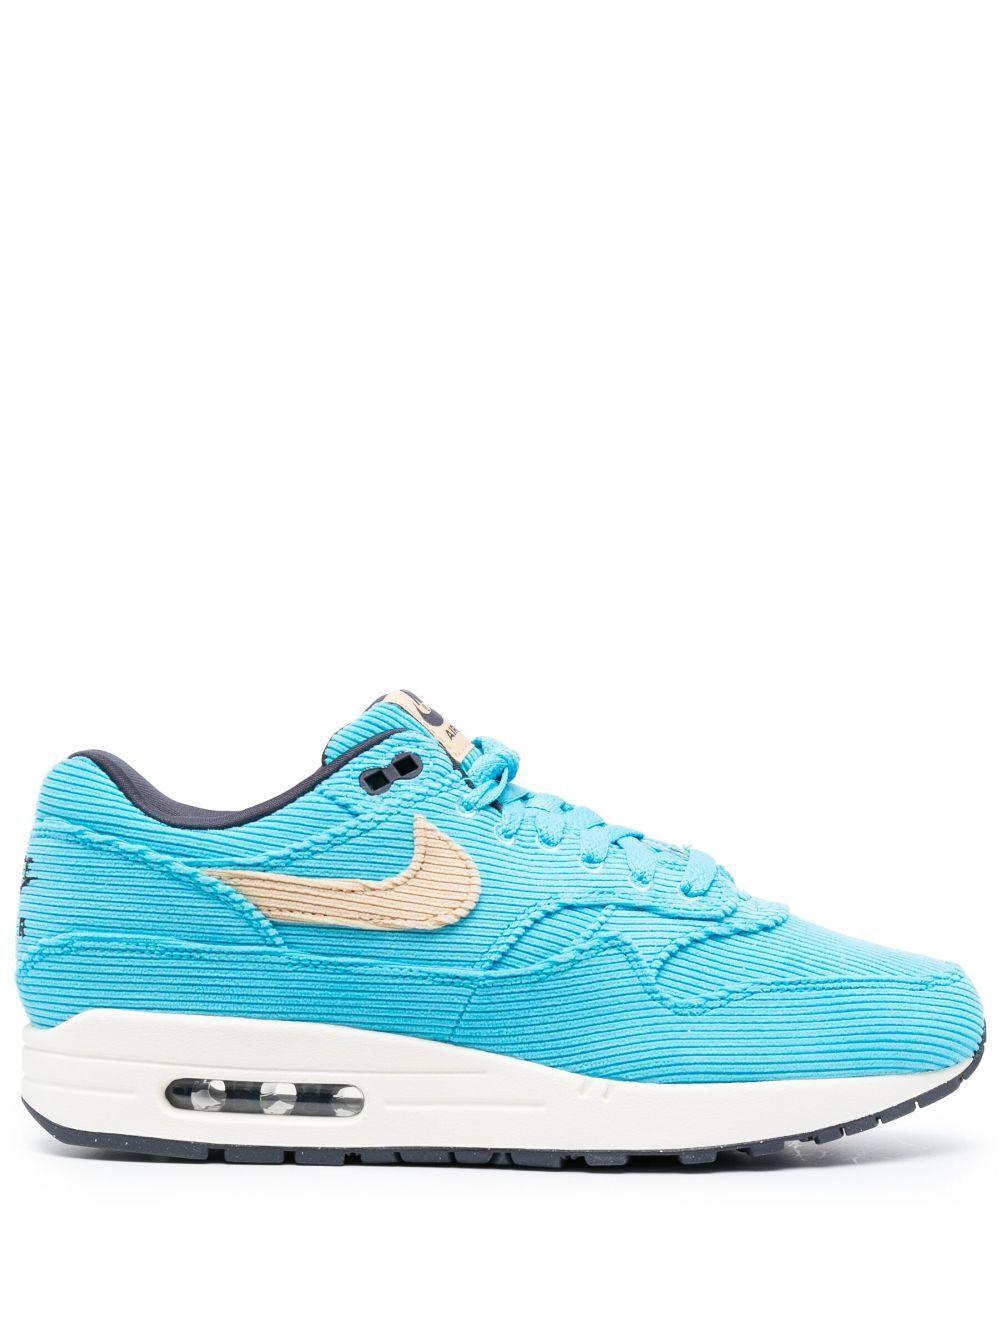 Nike Air 1 Premium Shoes in Blue for Men Lyst